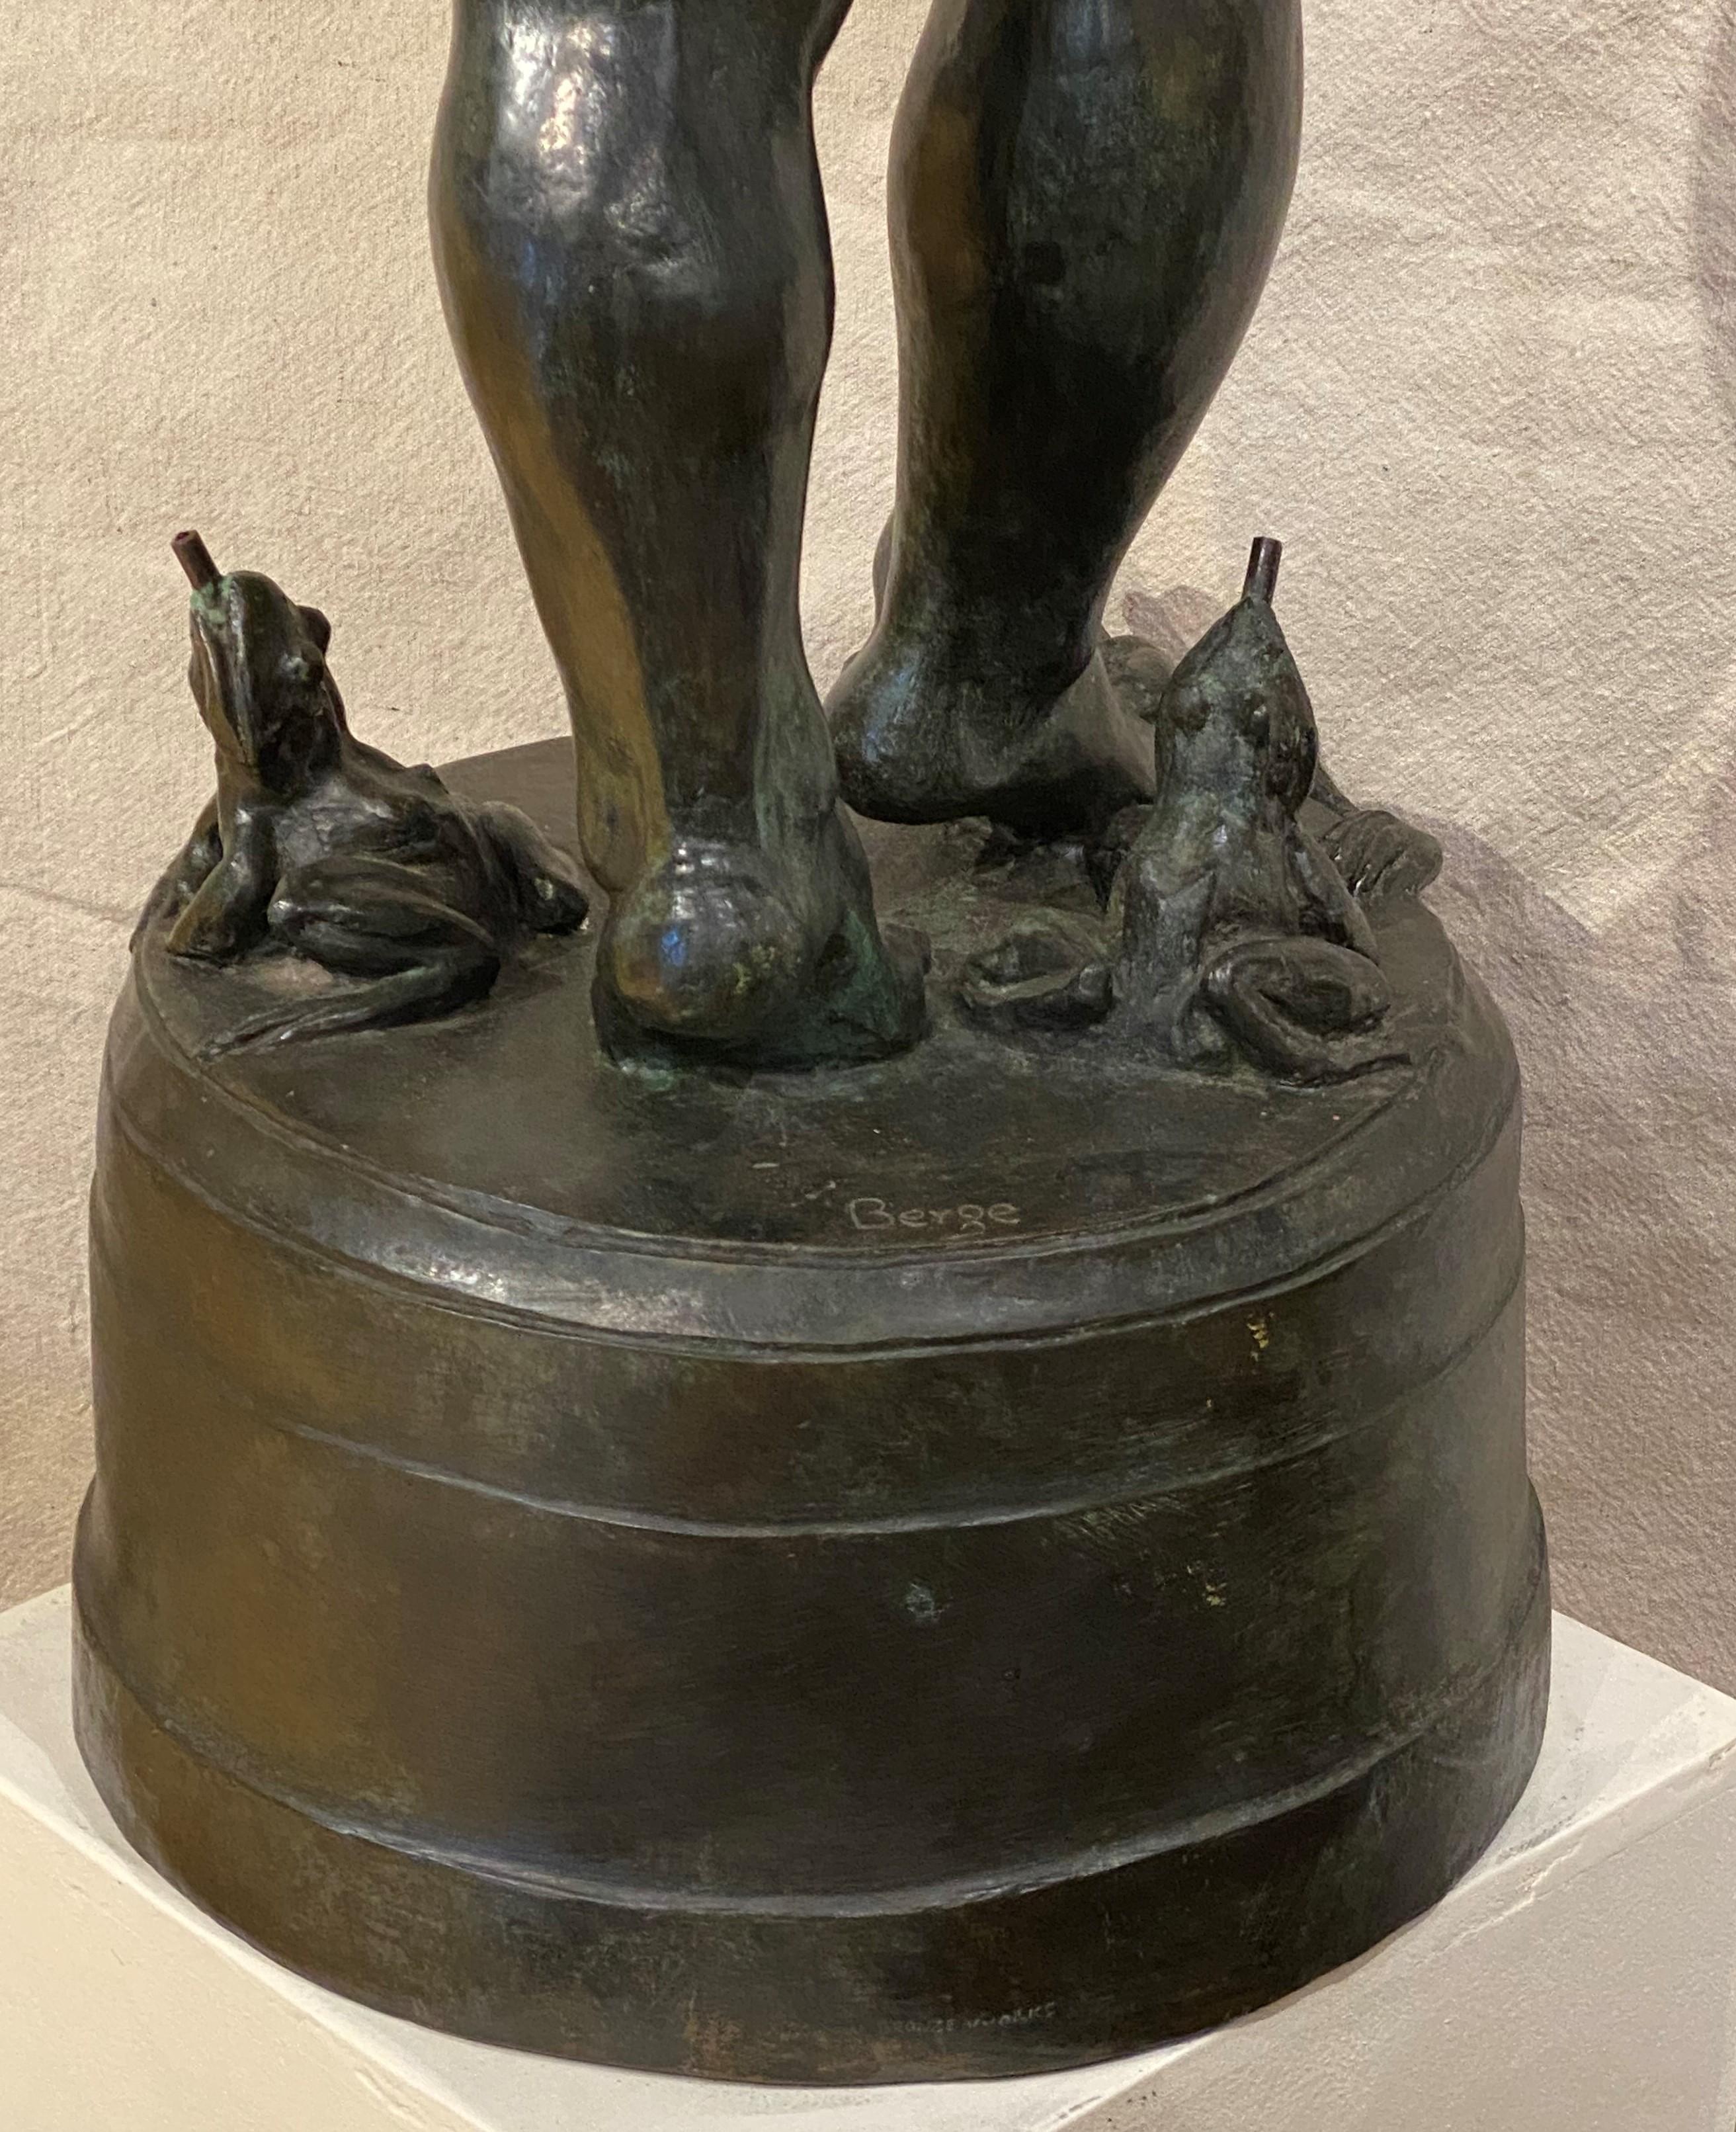 A fine large cast figural bronze fountain of a nude boy with pan flute and three frogs known as “Frog Baby” by American sculptor Edward Berge (1876-1924). Berge was born in Baltimore, MD, studied at the Maryland Institute, Rinehart School in